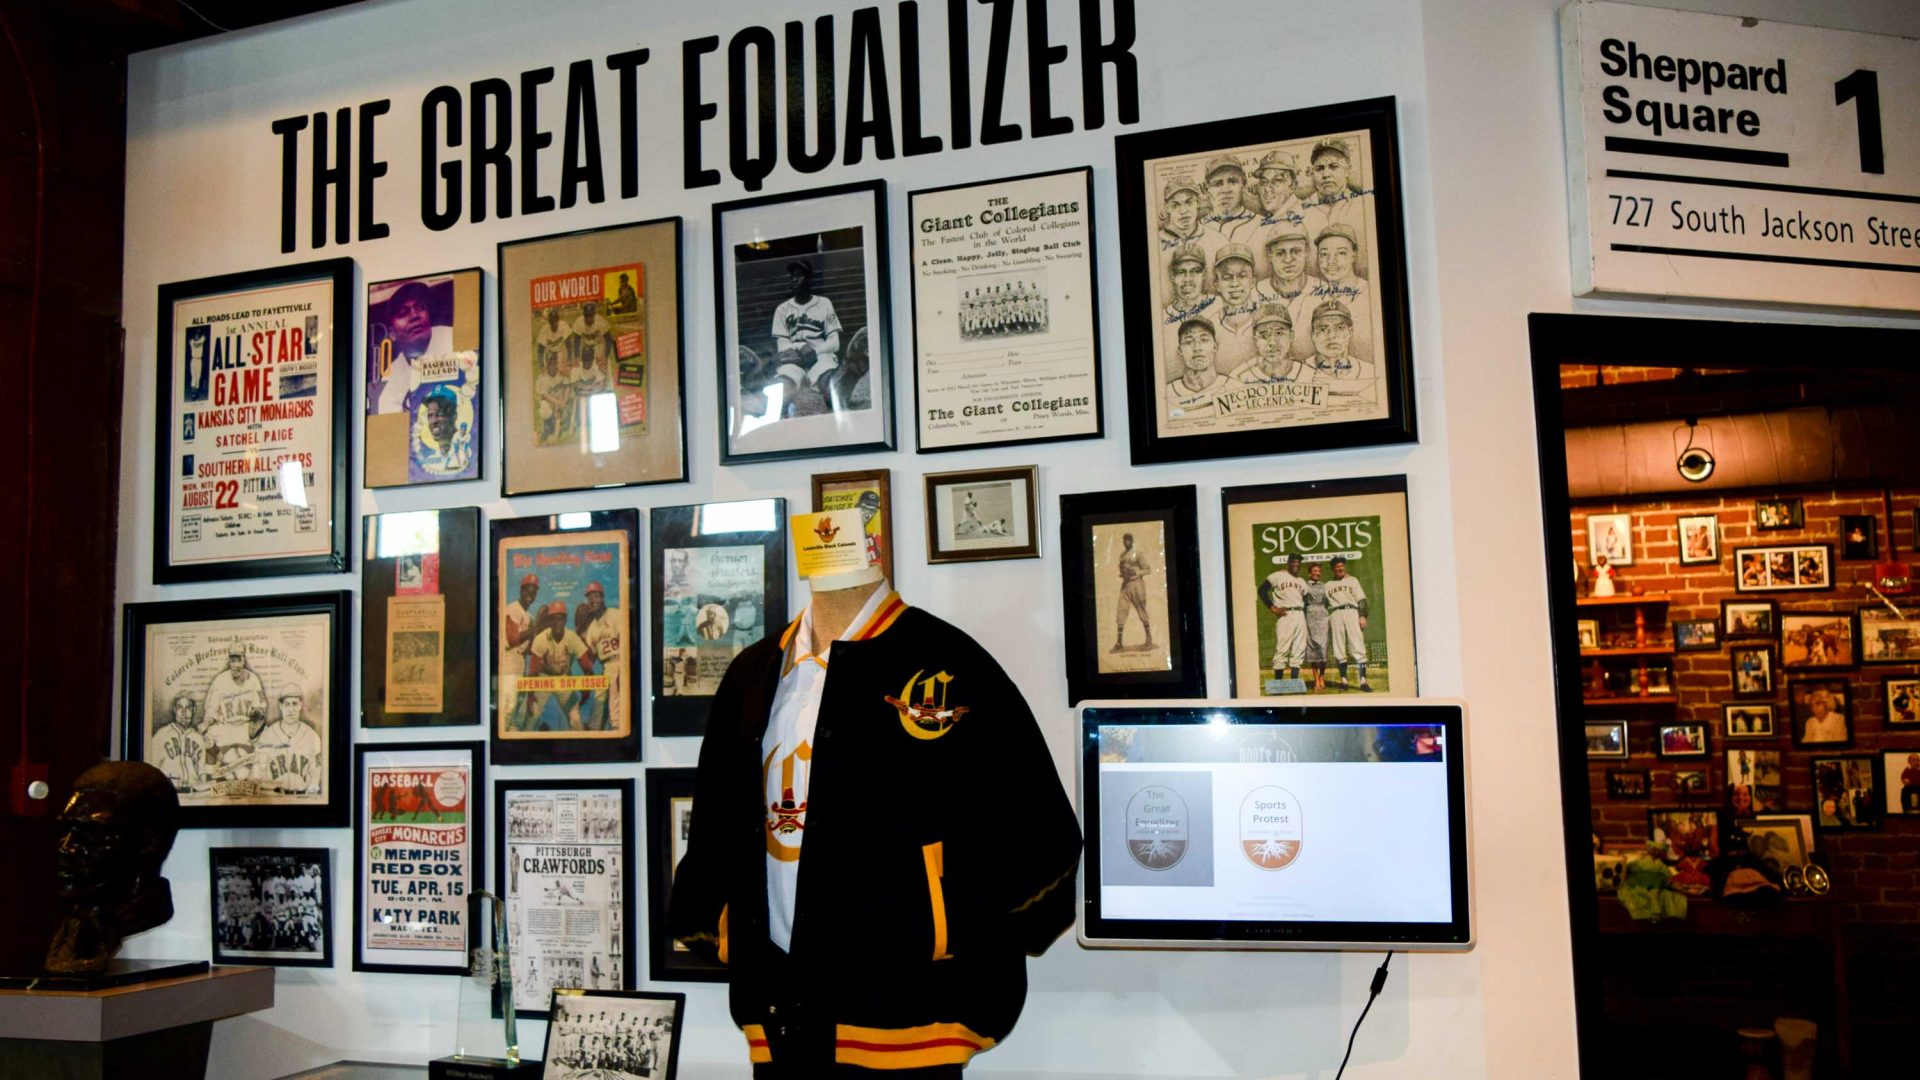 A wall says the Great Equalizer and has framed prints on it.